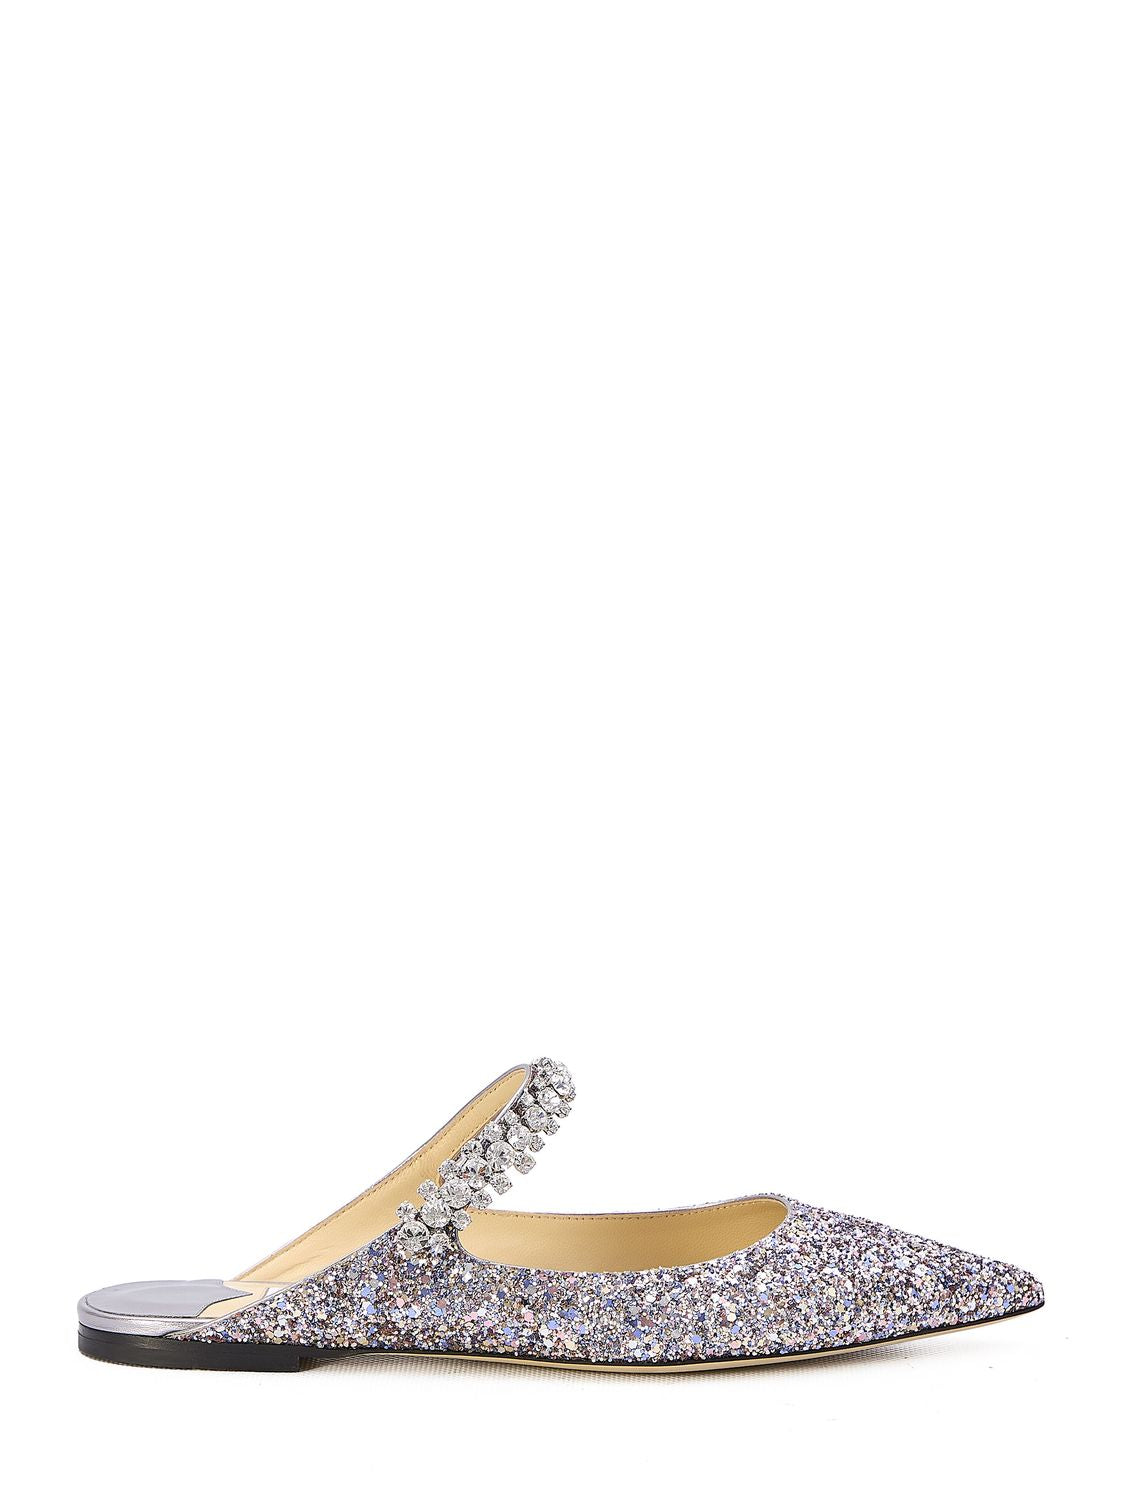 Multicolor Glitter Flat Ballerinas with Crystal Strap